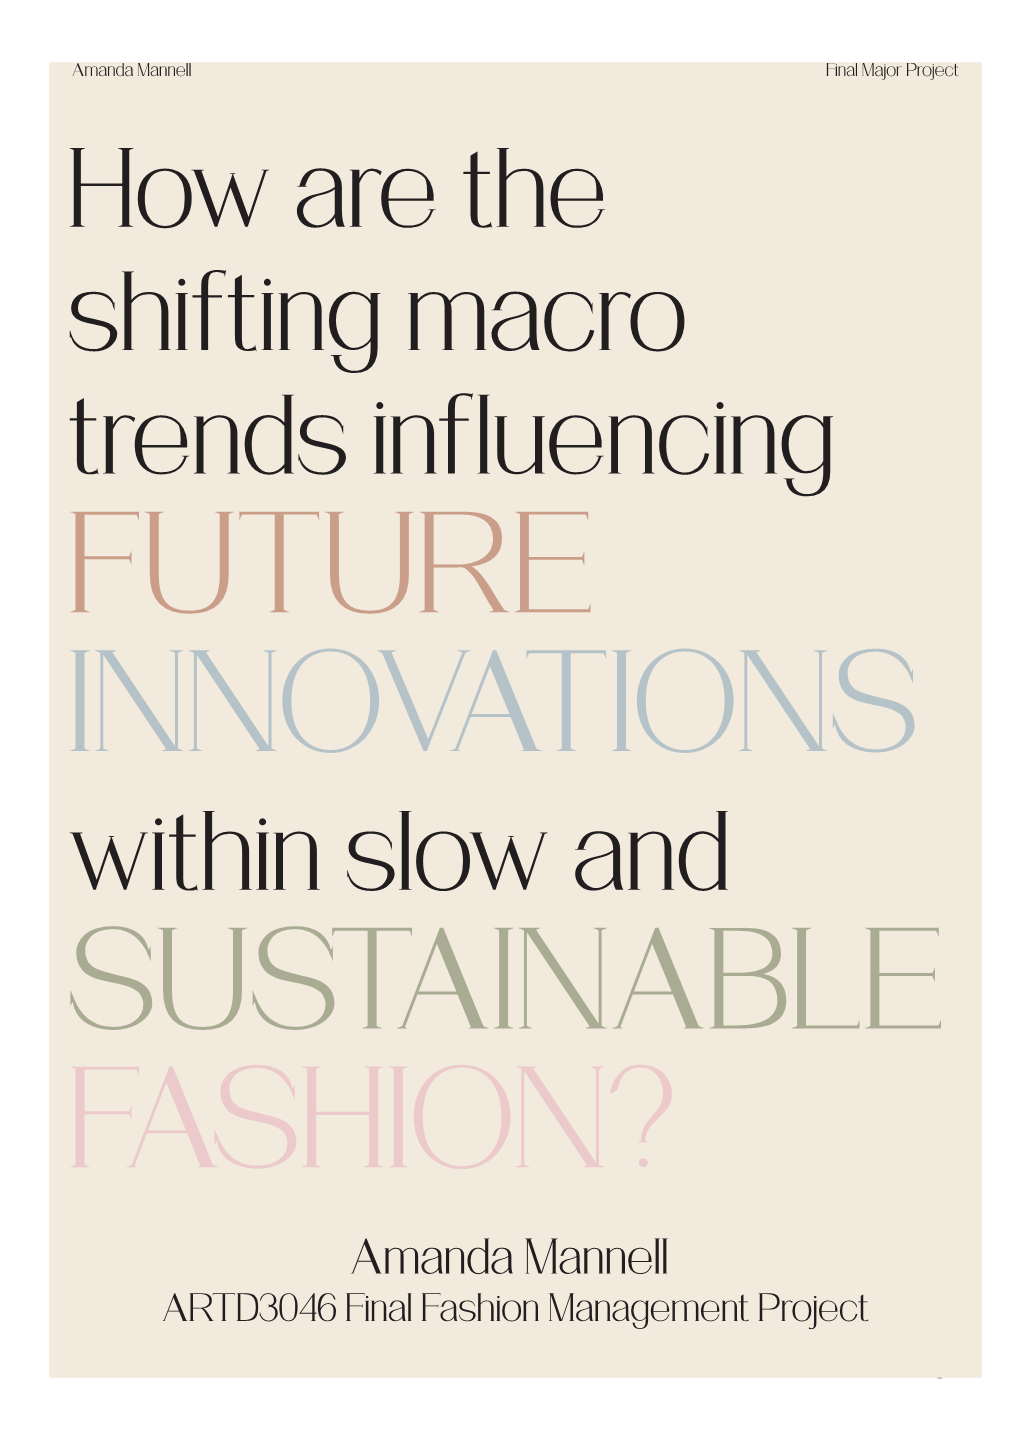 How Are the Shifting Macro Trends Influencing Within Slow